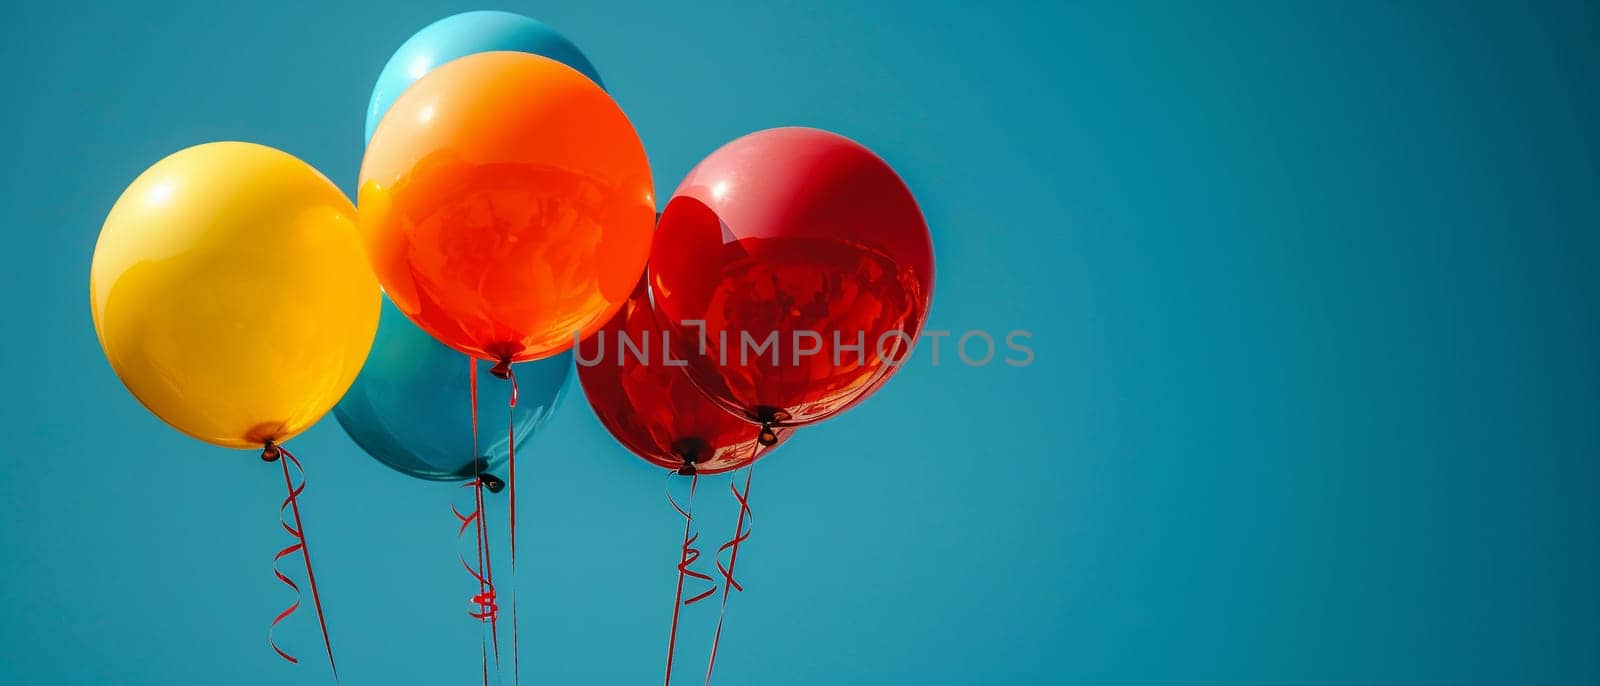 Series of colorful balloons against clear blue sky, representing celebration.